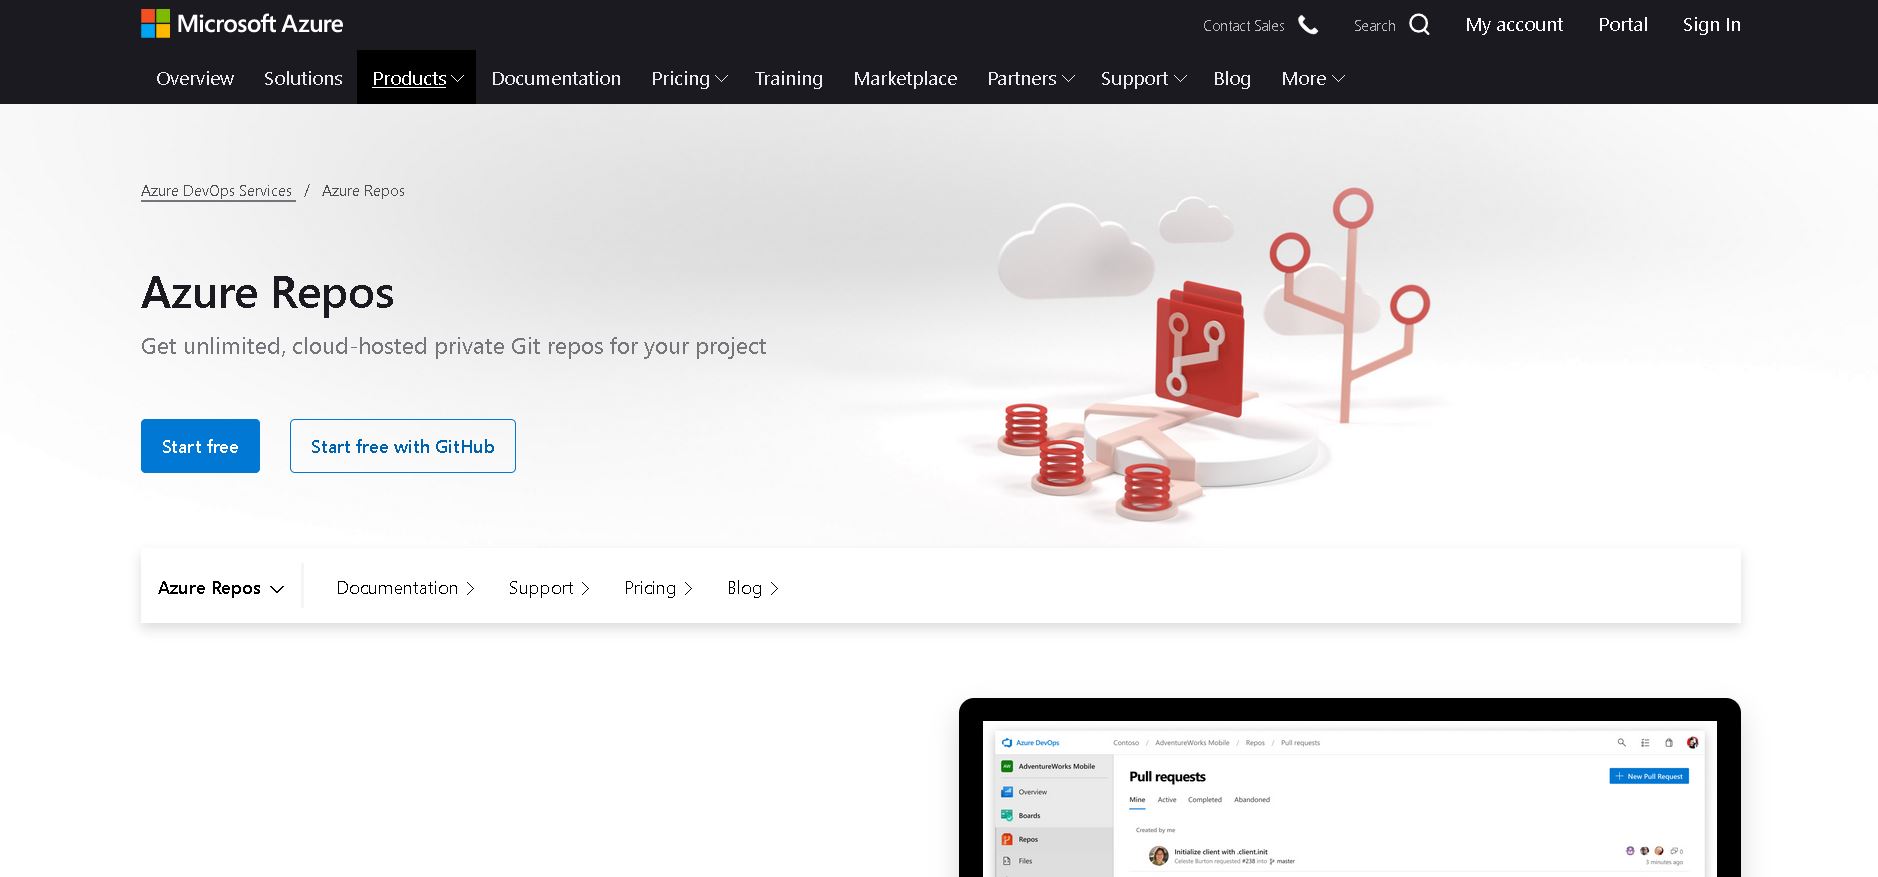 Azure Repos home page, shown here, is a popular alternative to GitHub.